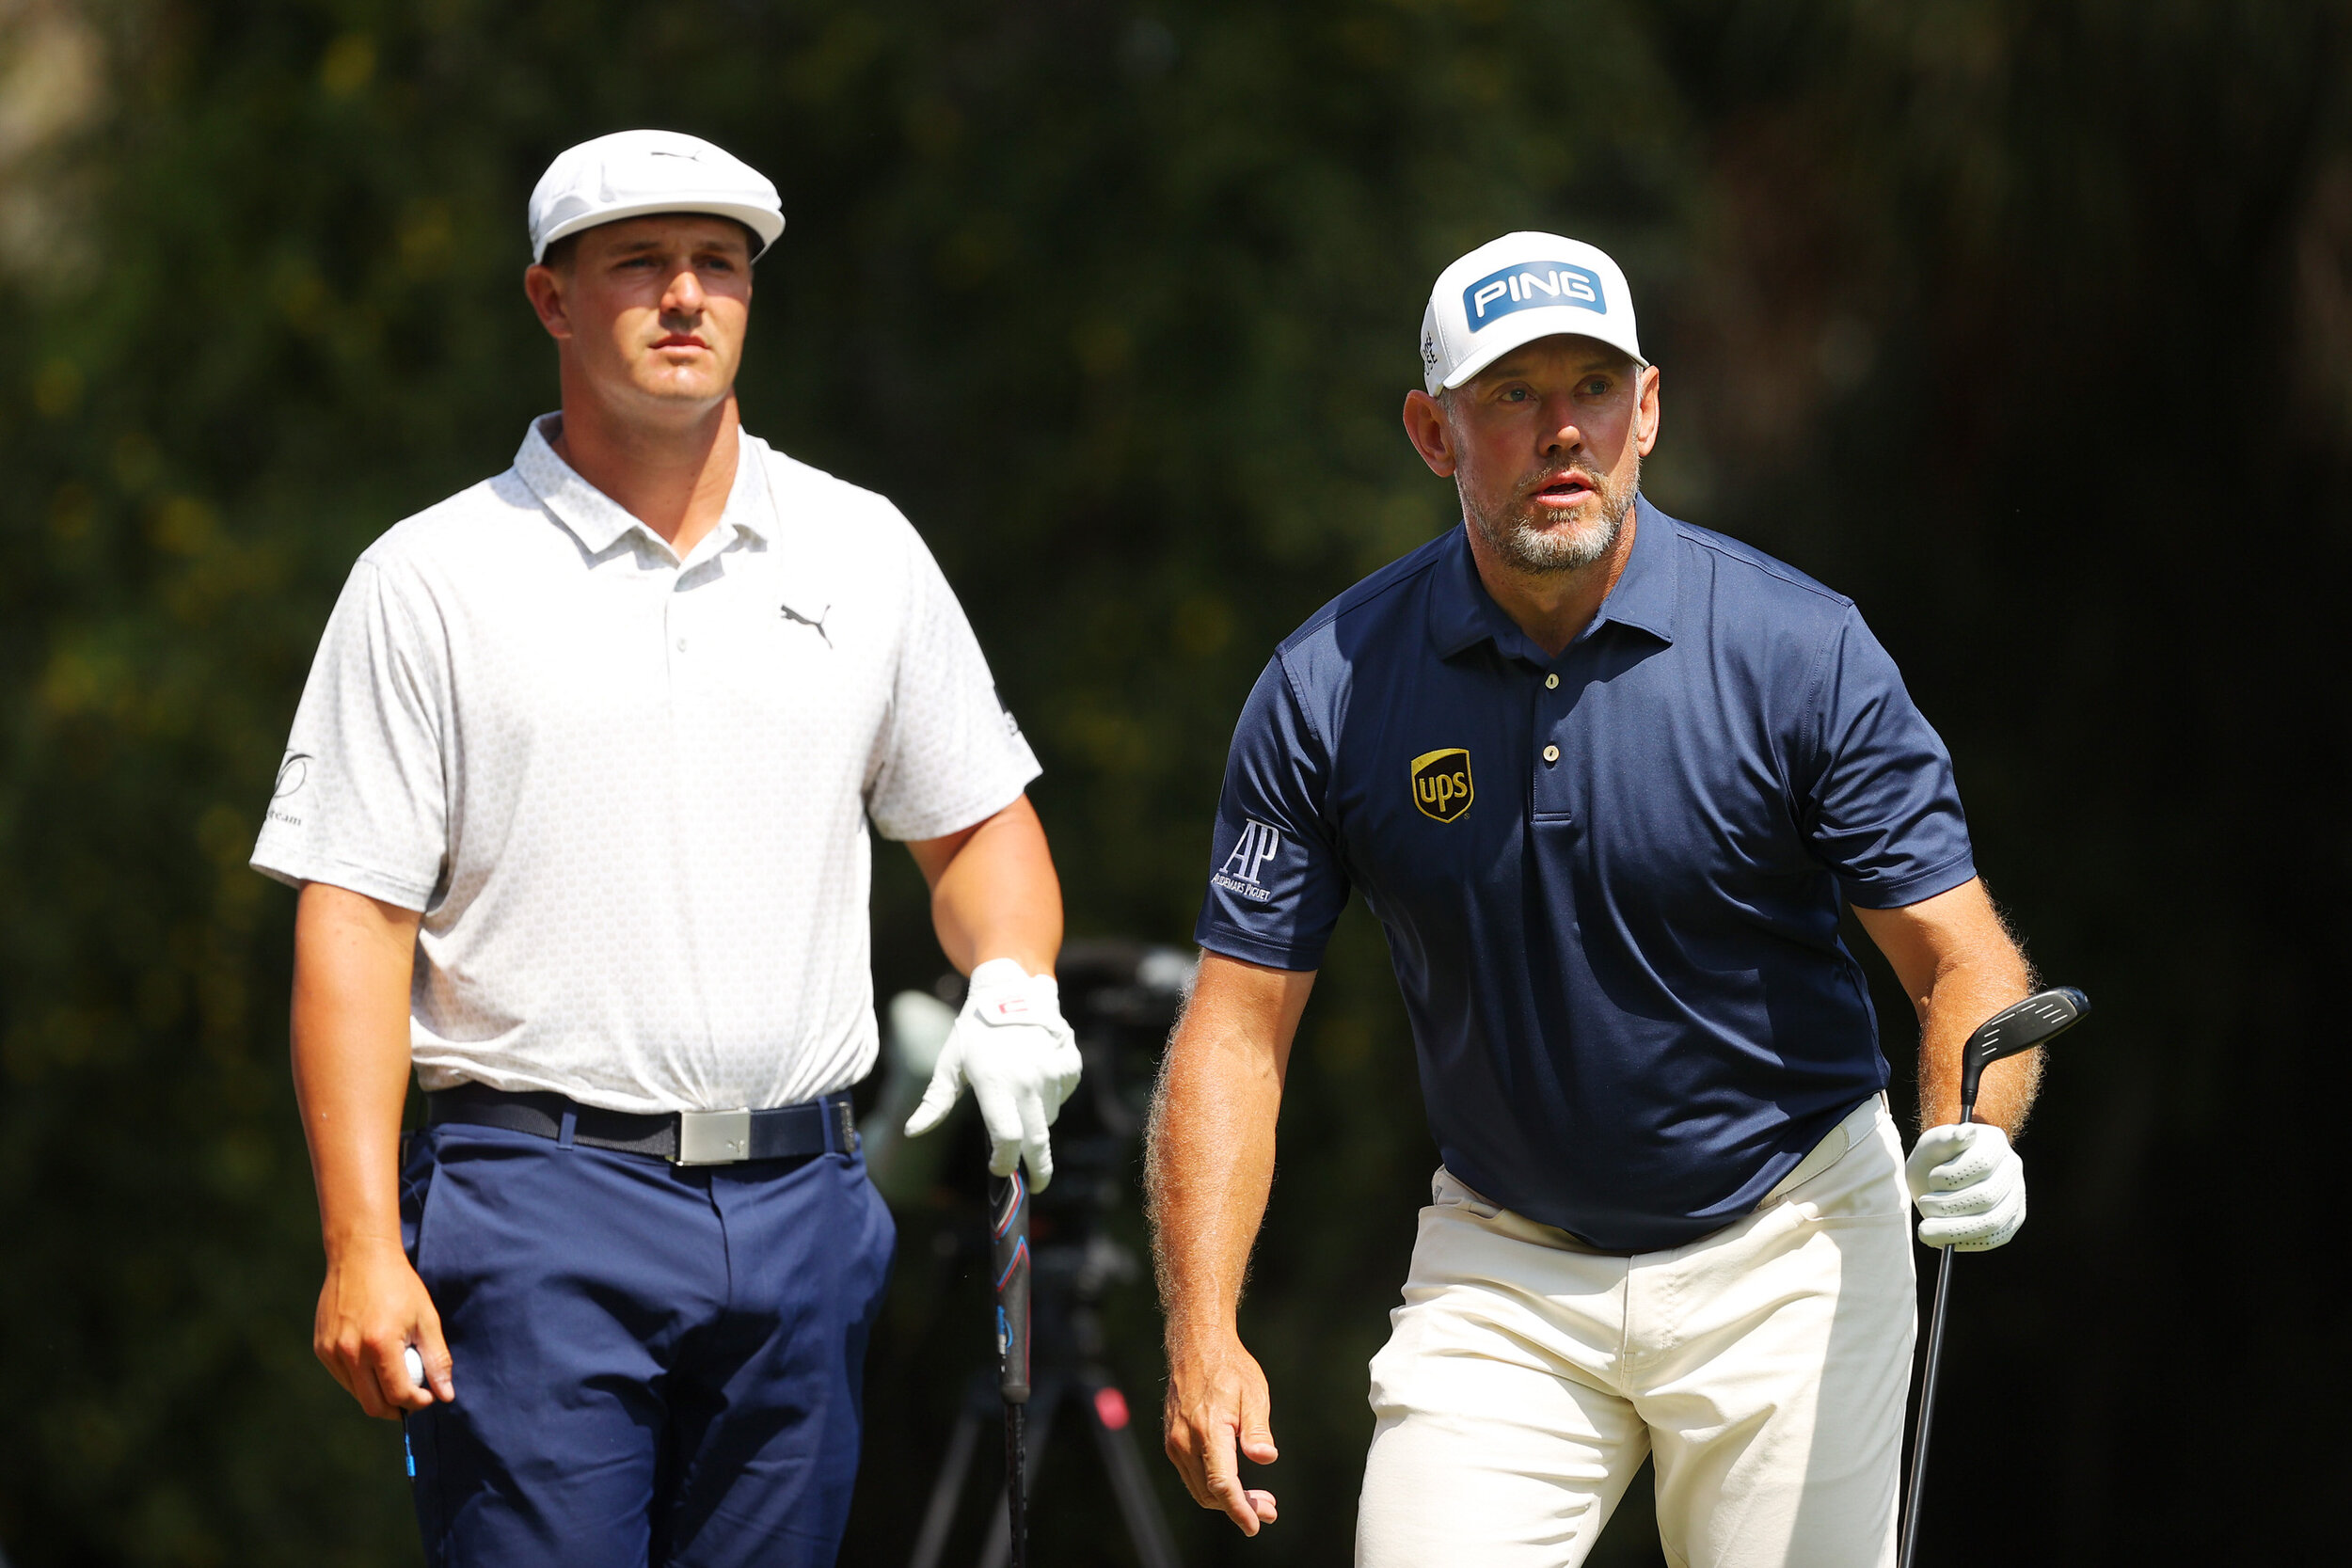  PONTE VEDRA BEACH, FLORIDA - MARCH 14: Bryson DeChambeau of the United States and Lee Westwood of England look on from the second tee during the final round of THE PLAYERS Championship on THE PLAYERS Stadium Course at TPC Sawgrass on March 14, 2021 